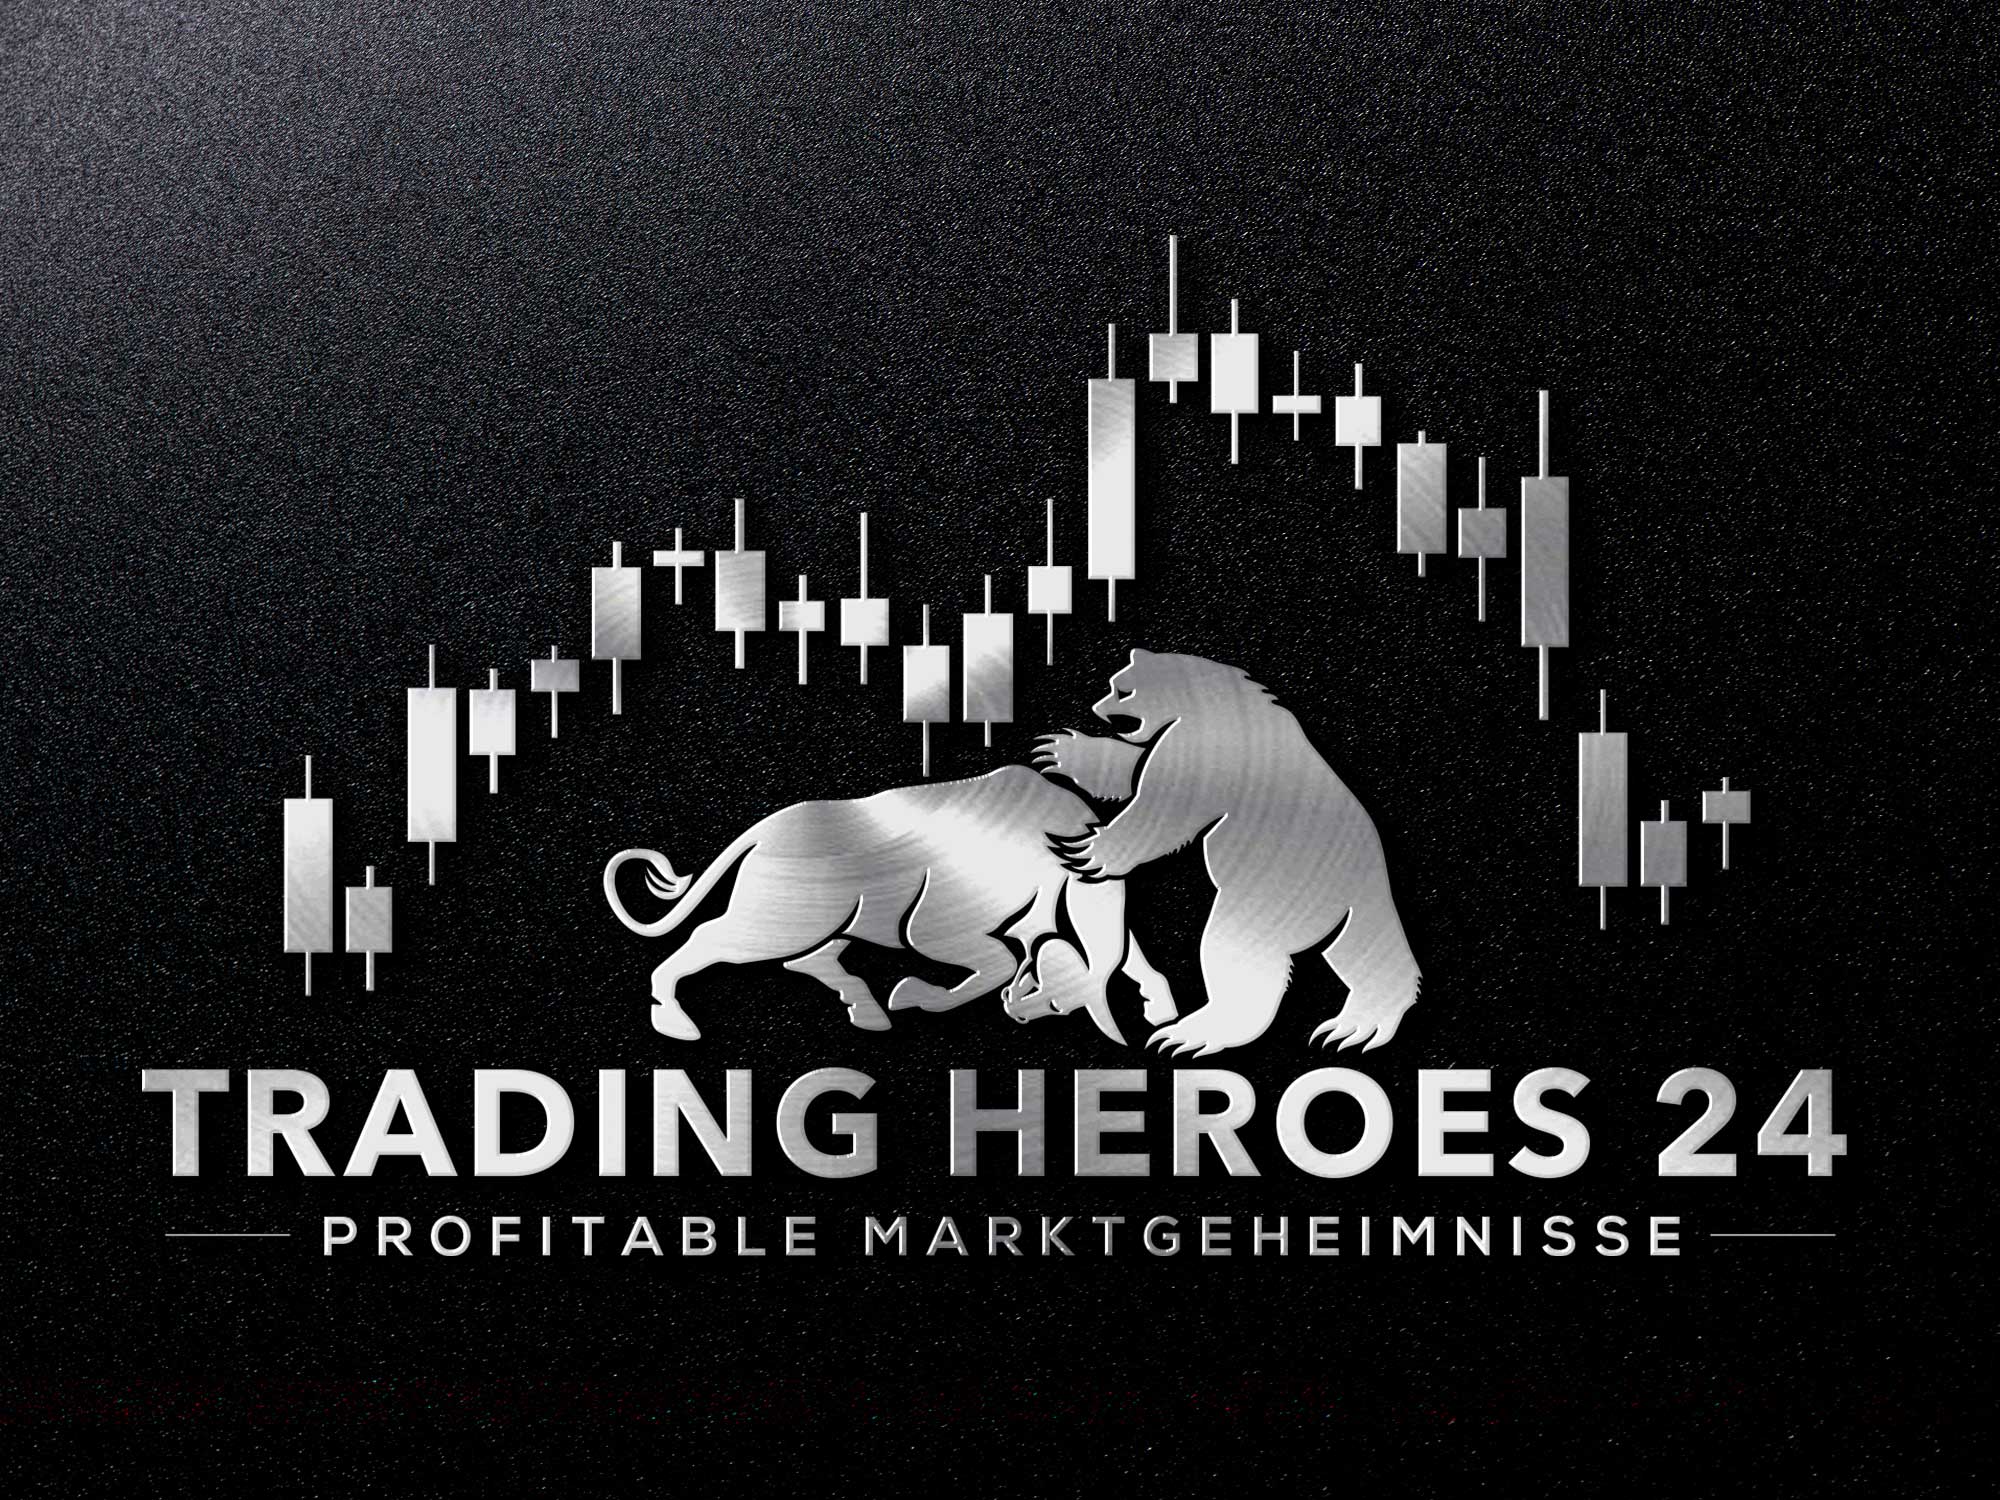 Trading Heroes24